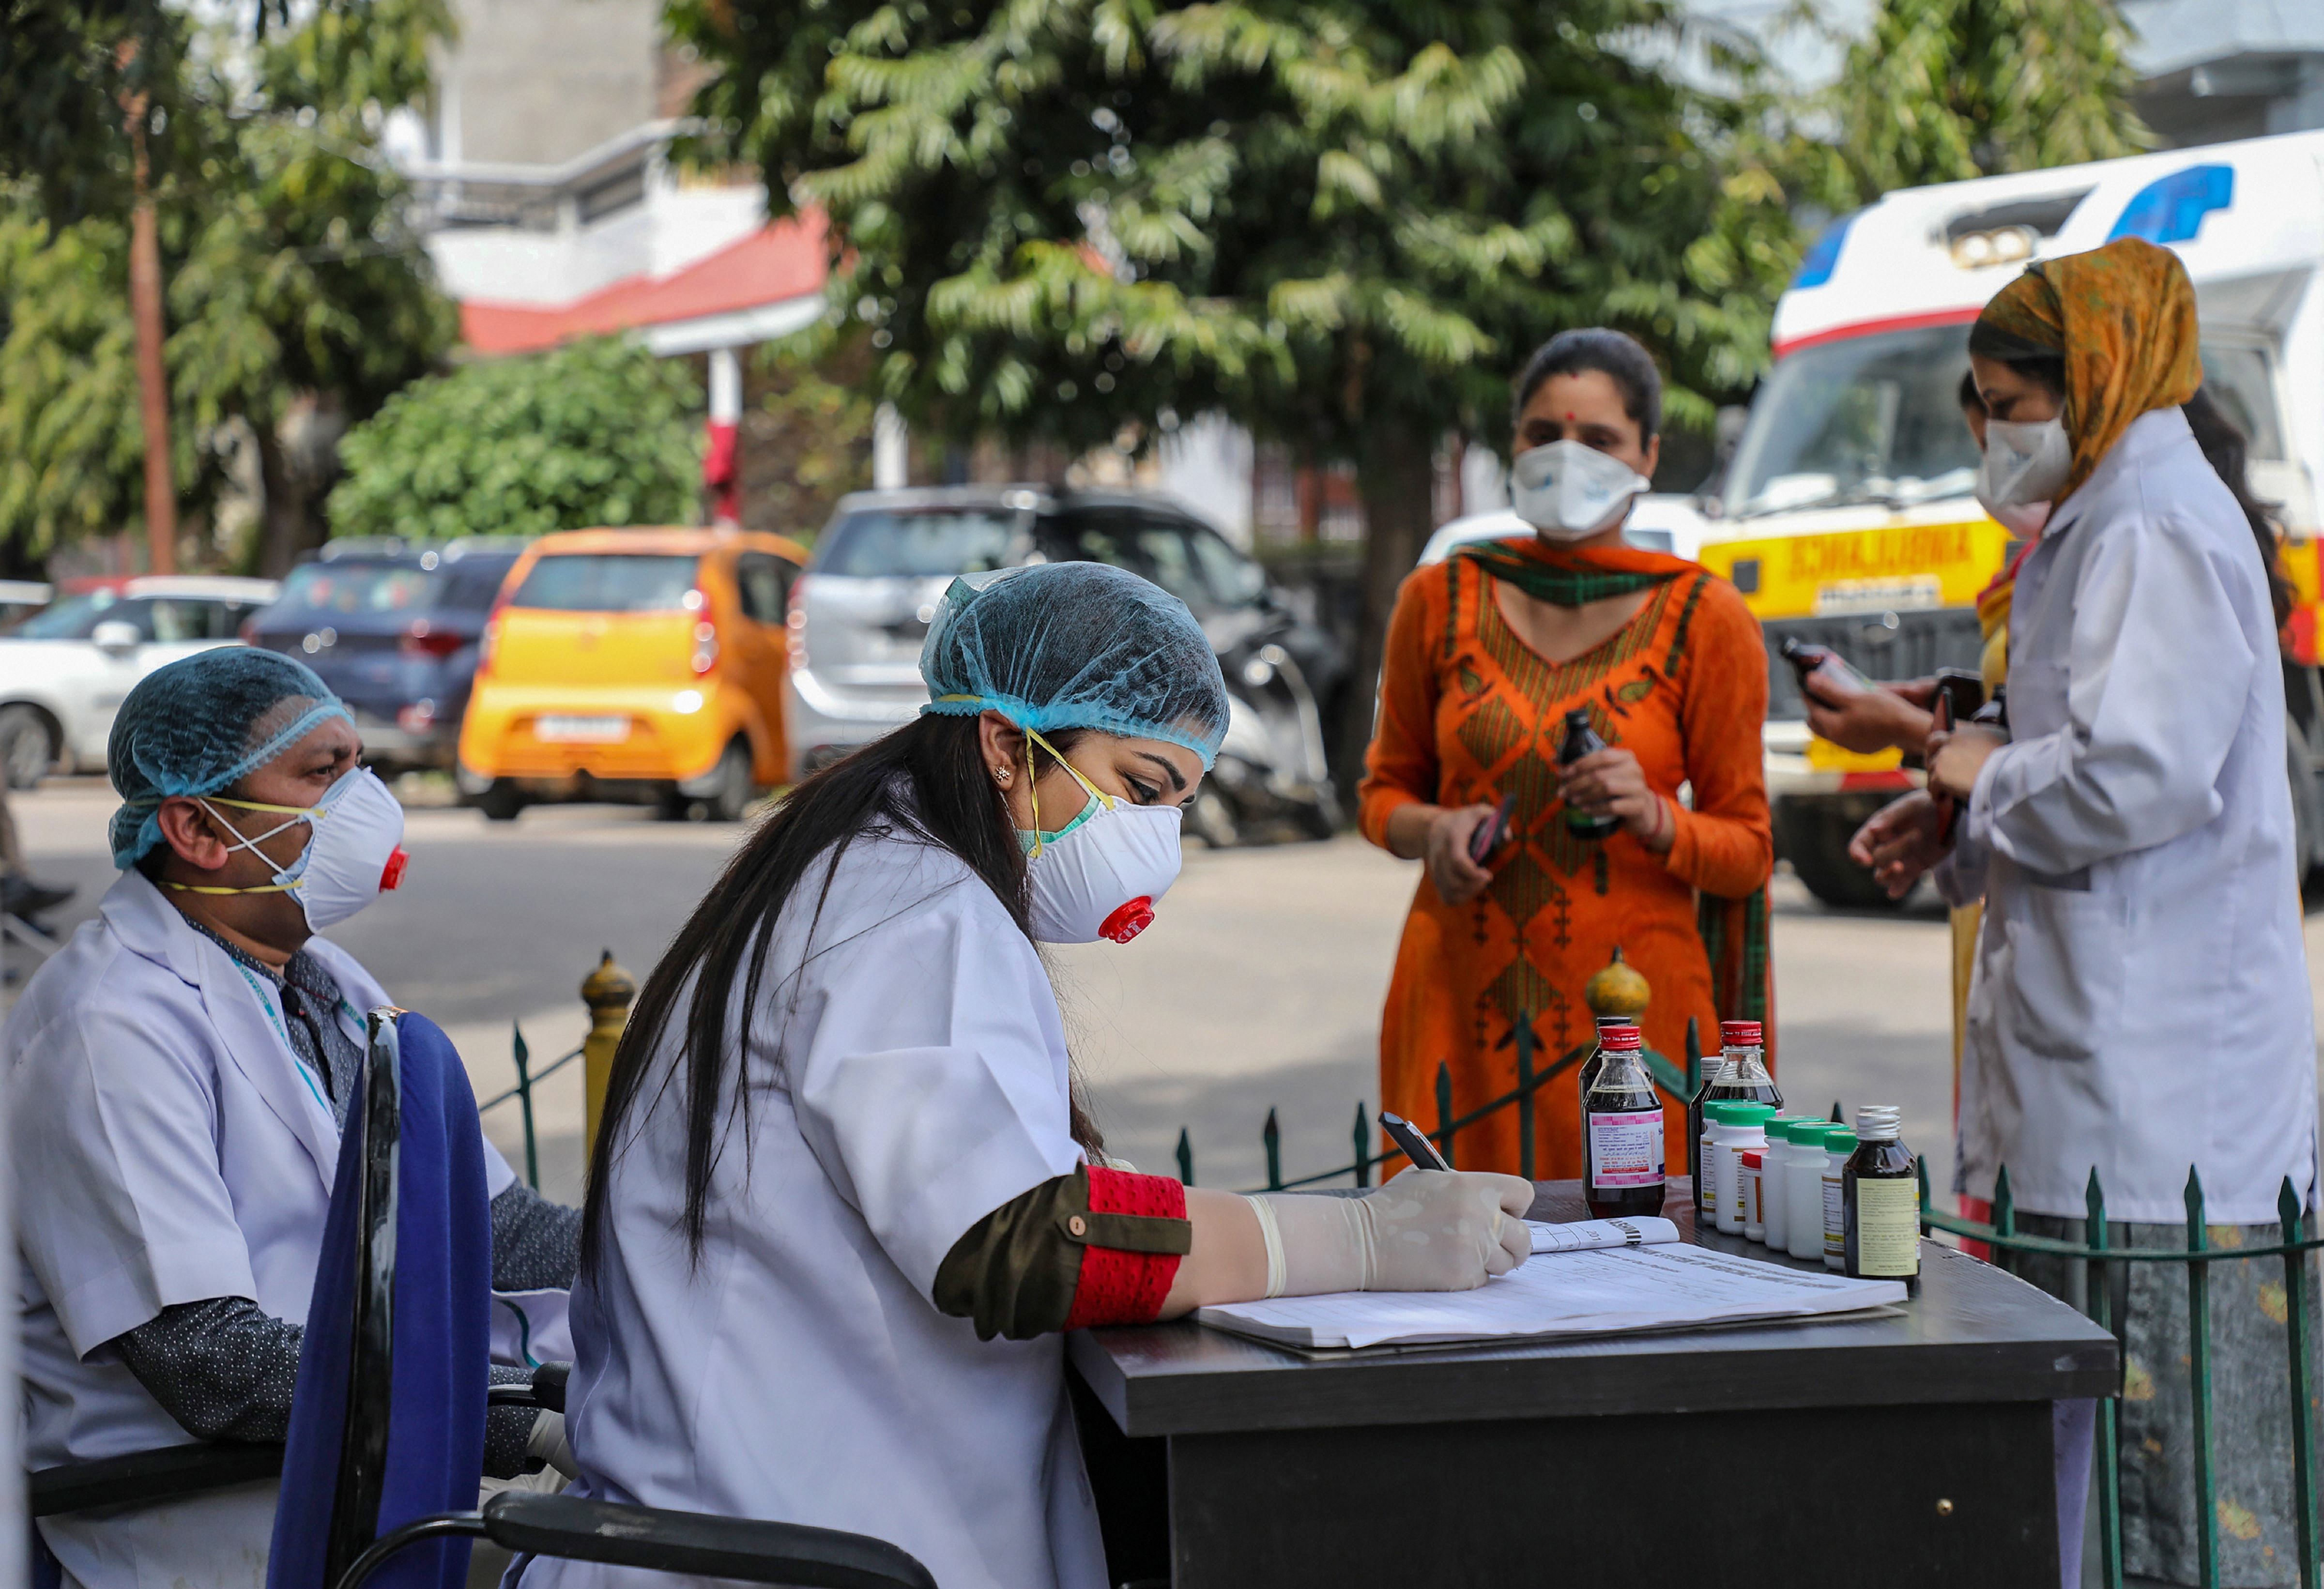 Doctors wearing protective suits as a precautionary measure against the coronavirus check patients outside an isolation ward at Govt. Medical College hospital in Jammu. (Credit: PTI Photo)